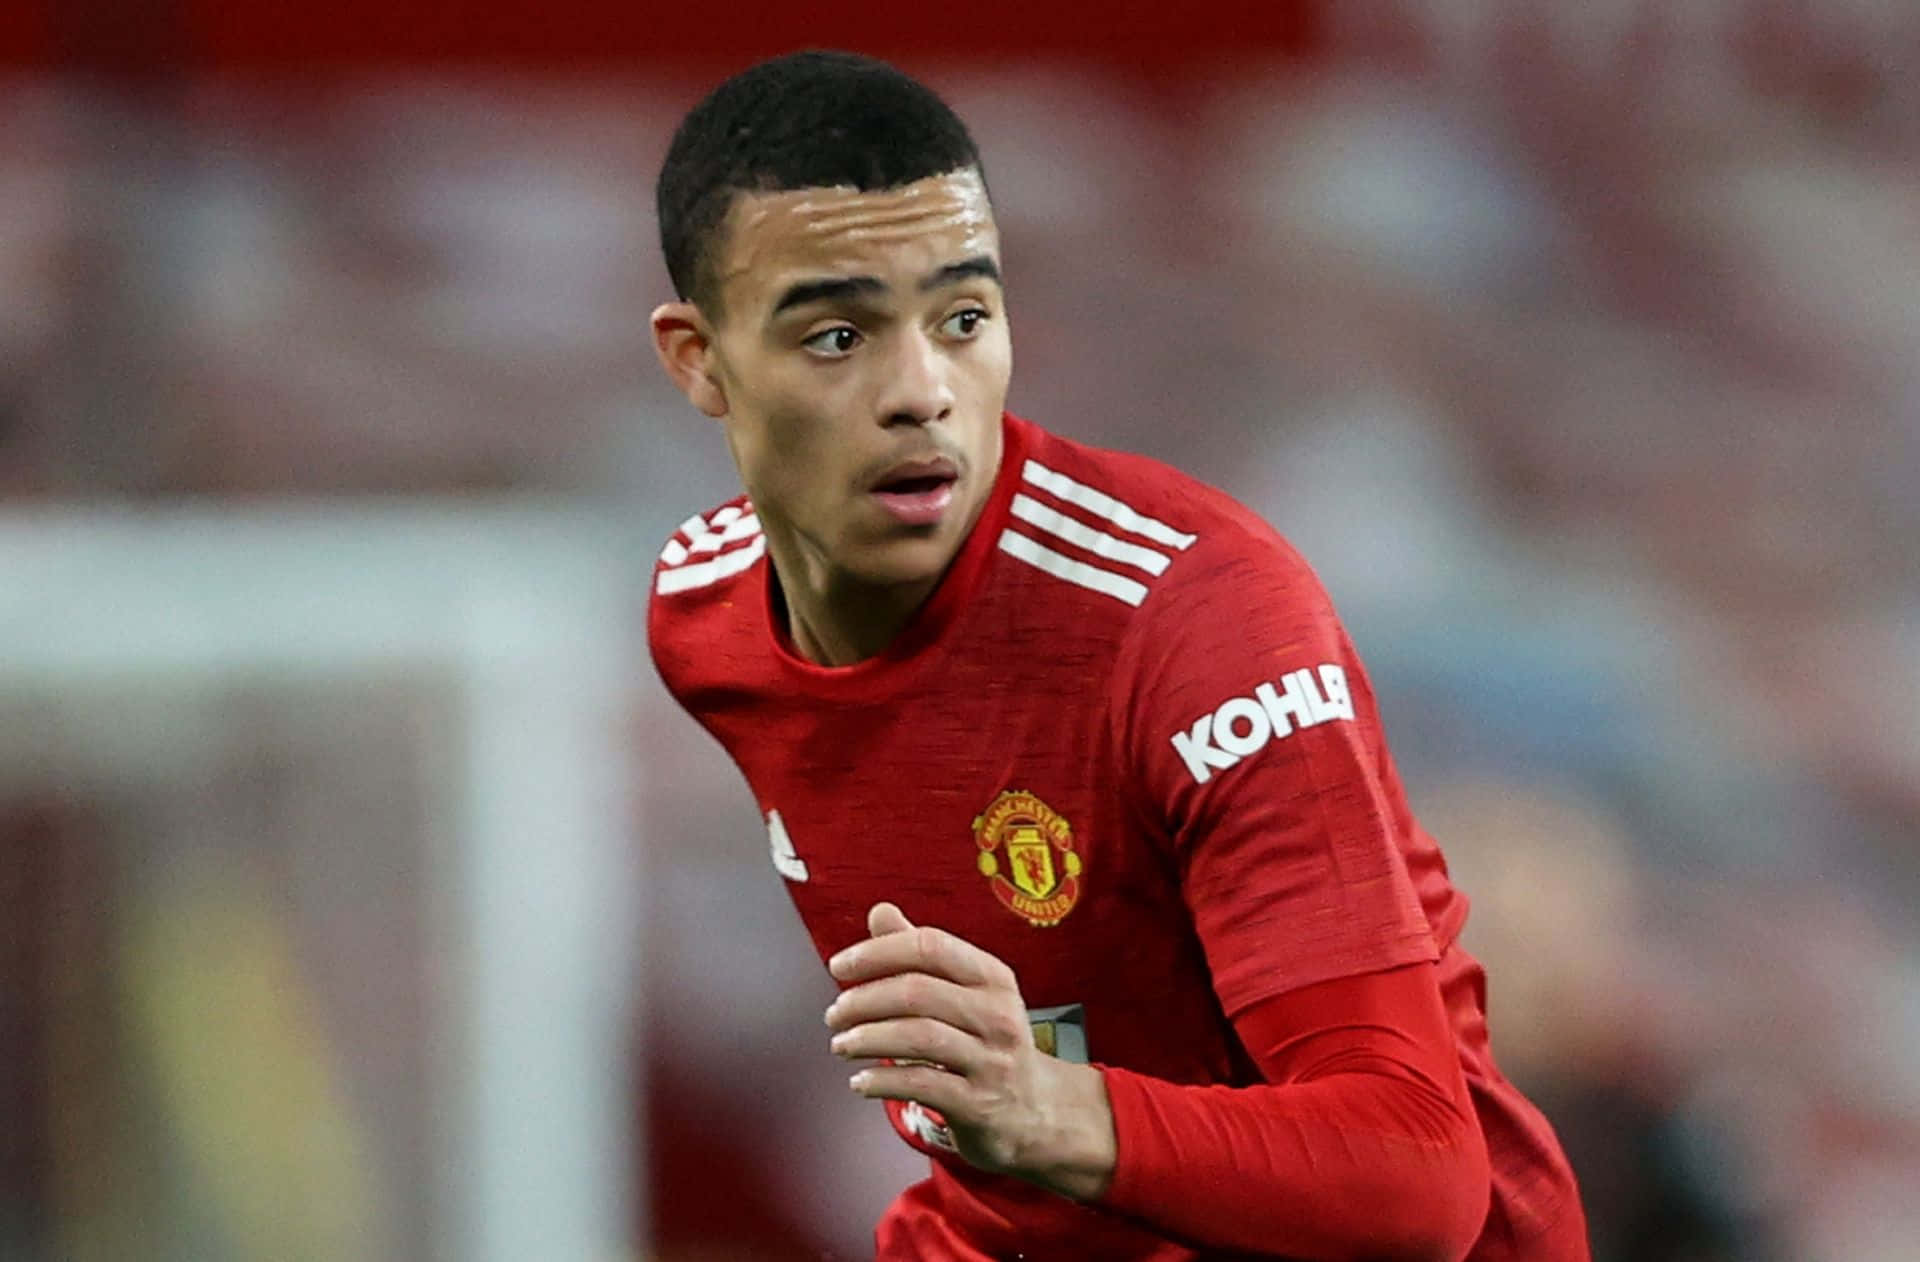 Mason Greenwood in action during a match